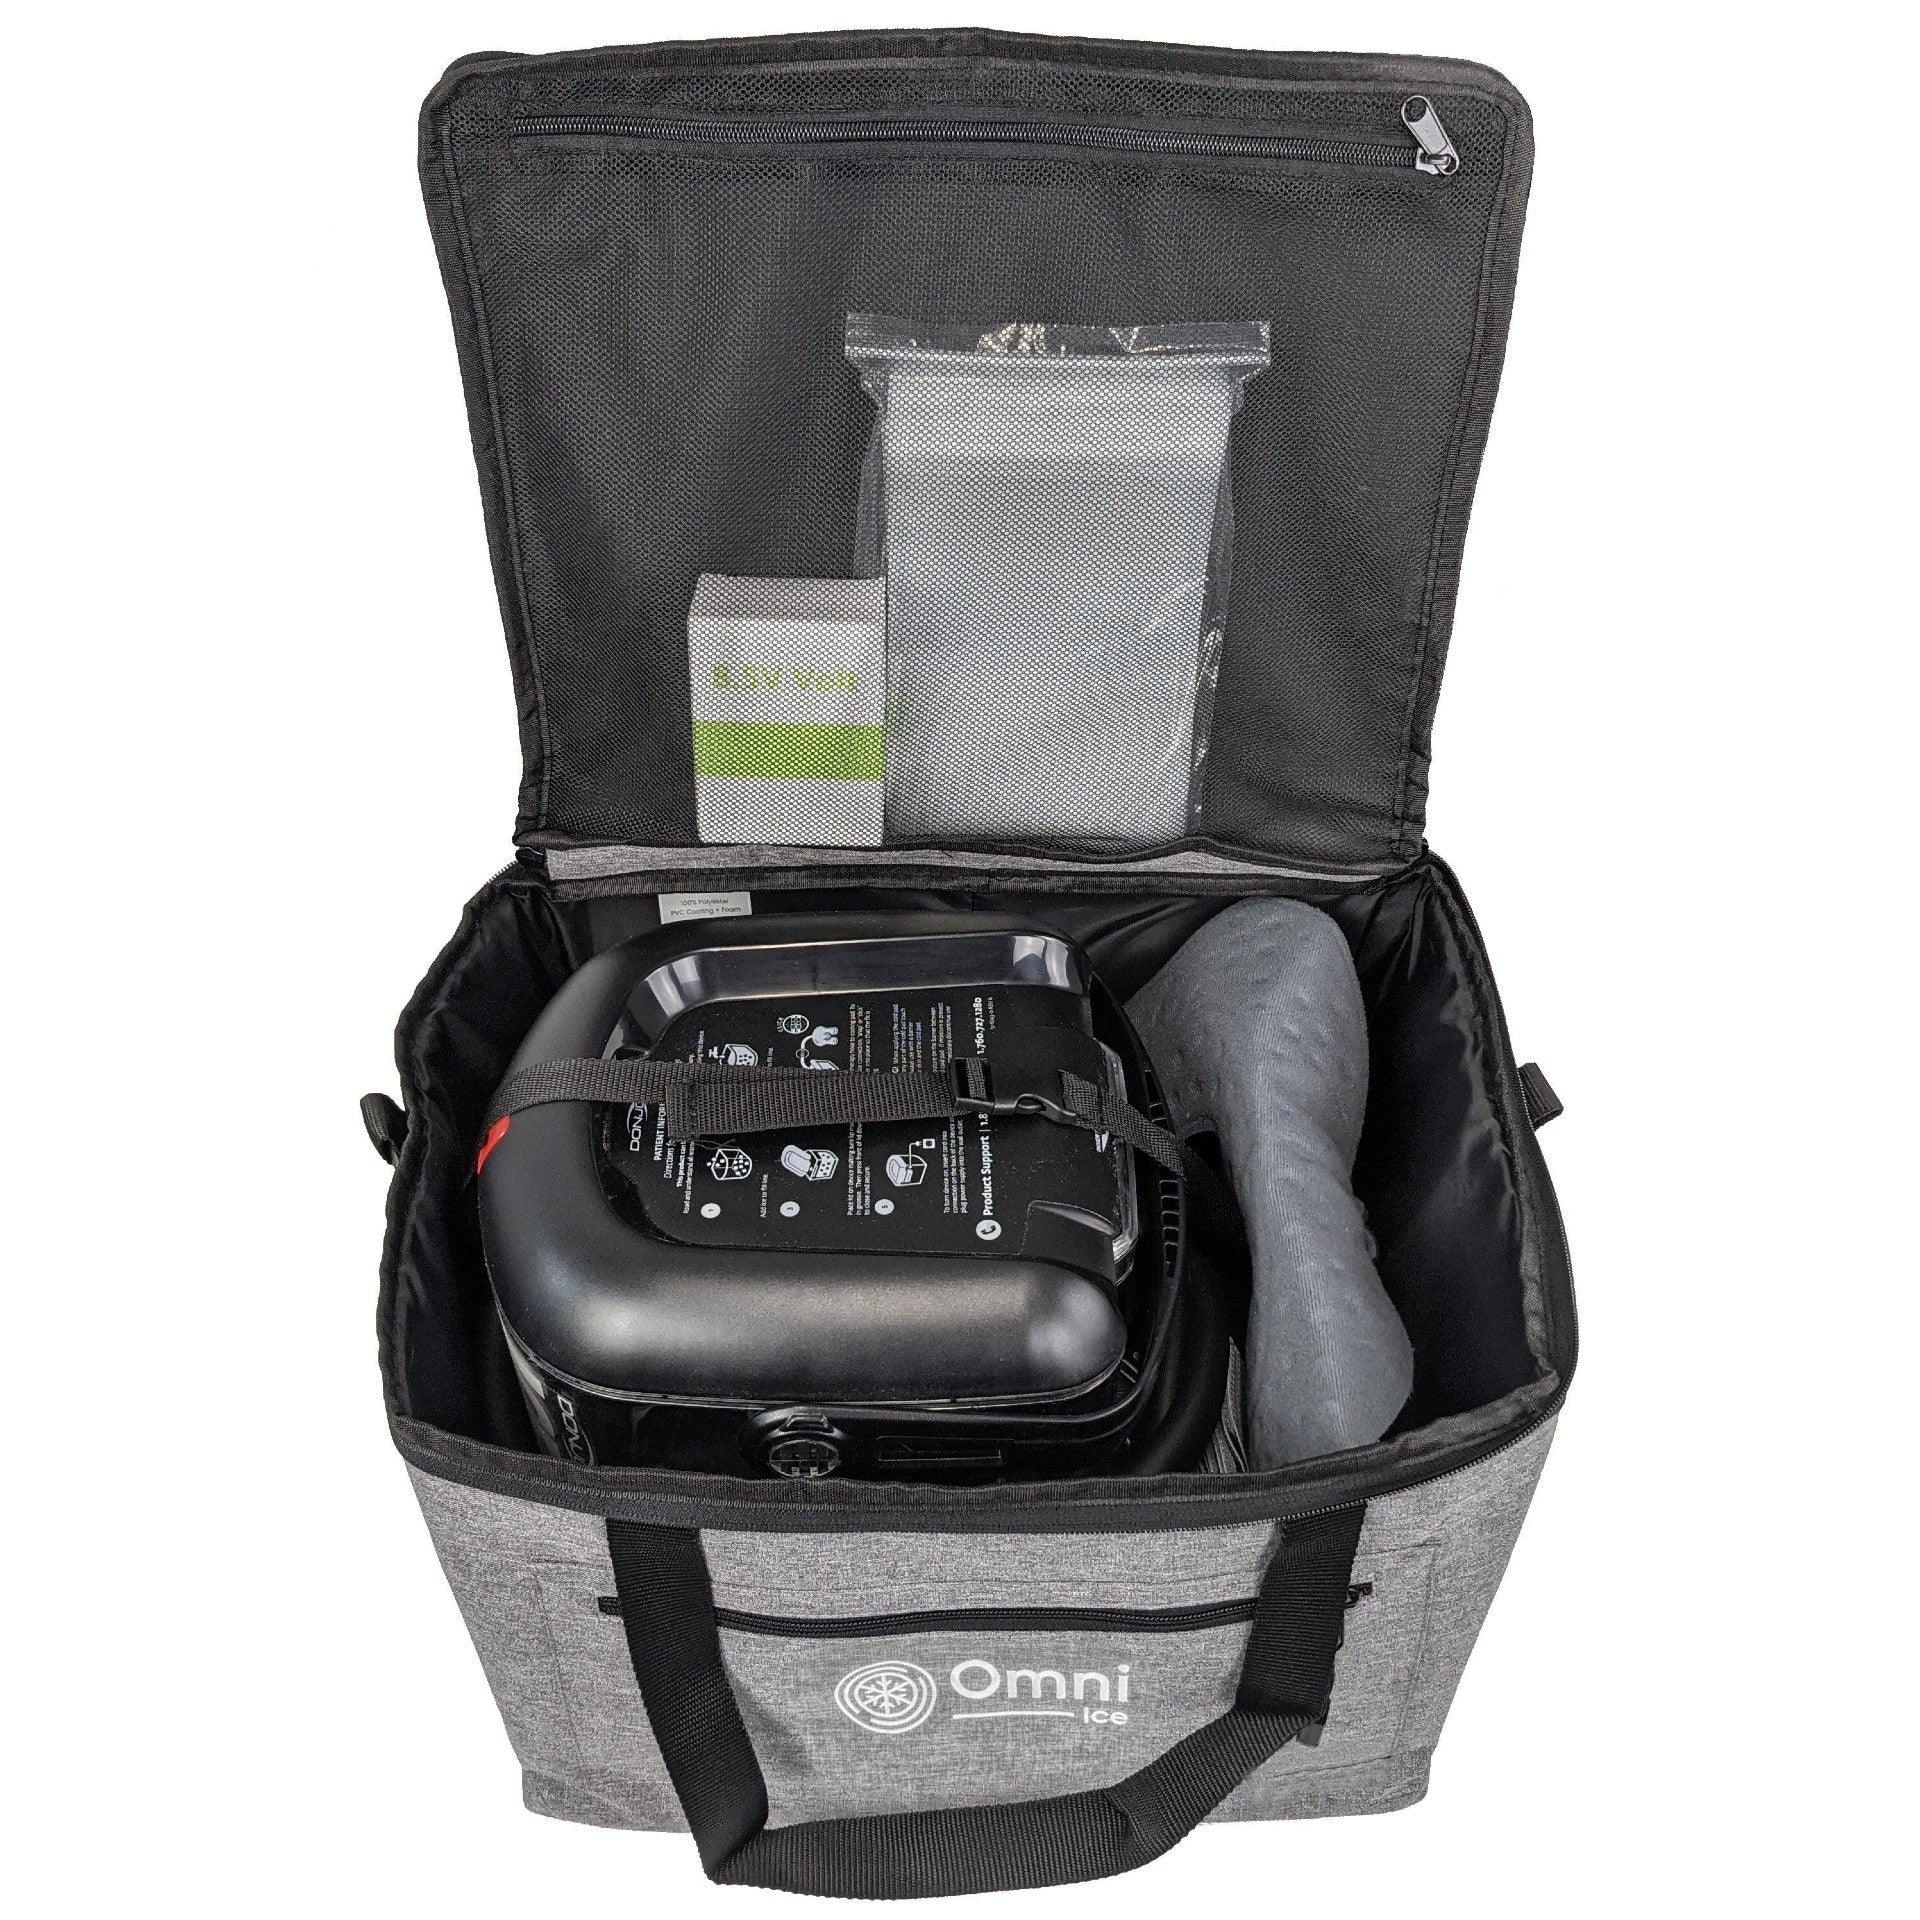 Omni Ice Cold Therapy Multi-Use Travel Portable Carry Bag - OI-1001 Omni Ice Cold Therapy Multi-Use Travel Portable Carry Bag - undefined by Supply Physical Therapy Accessories, Aircast Accessories, Breg, Breg Accessories, Breg Polar Care Wave, Breg Wave Accessories, Classic3 Accessories, Clear3, Clear3 Accessories, Cub Accessories, Cube, Cube Accessories, Donjoy Accessories, Glacier Accessories, Kodiak, Kodiak Accessories, Replacement